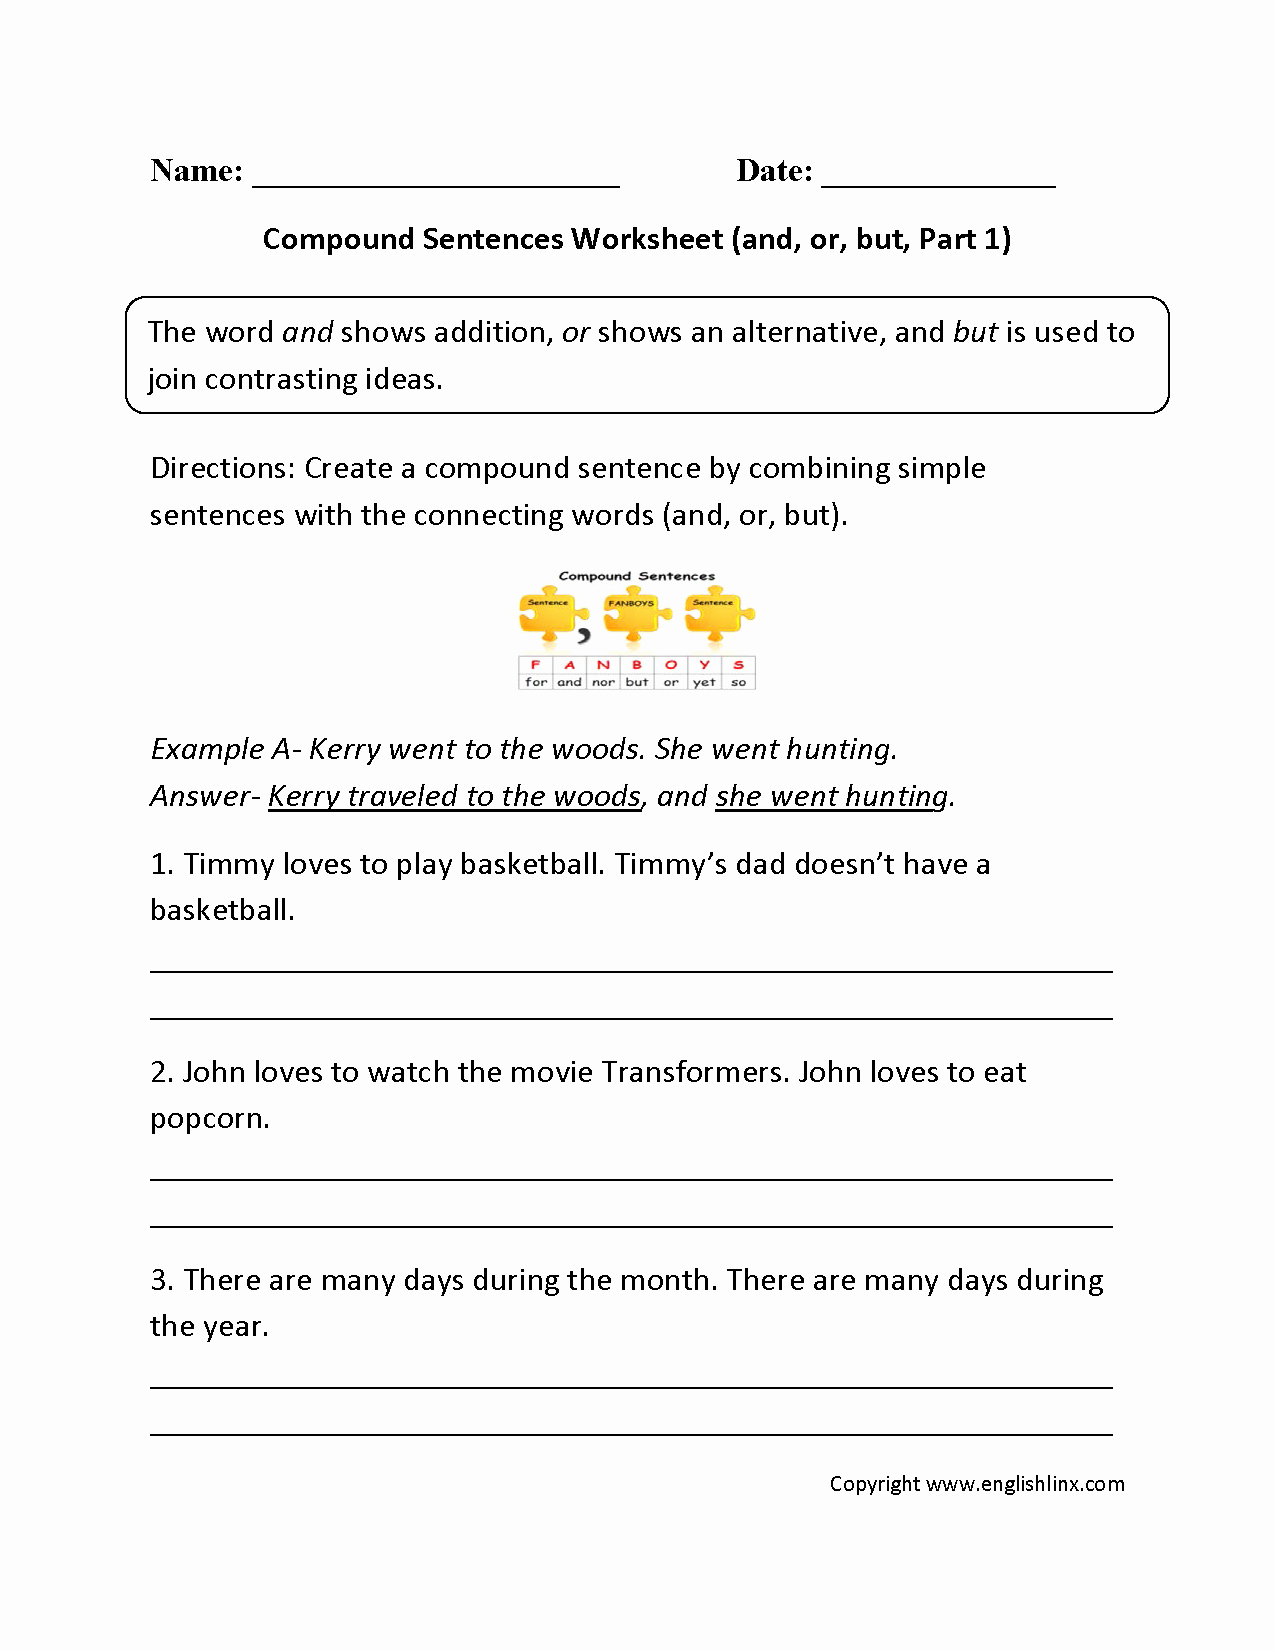 Compound Sentences Worksheet with Answers Awesome 13 Best Of Worksheets Pound Sentences Pound